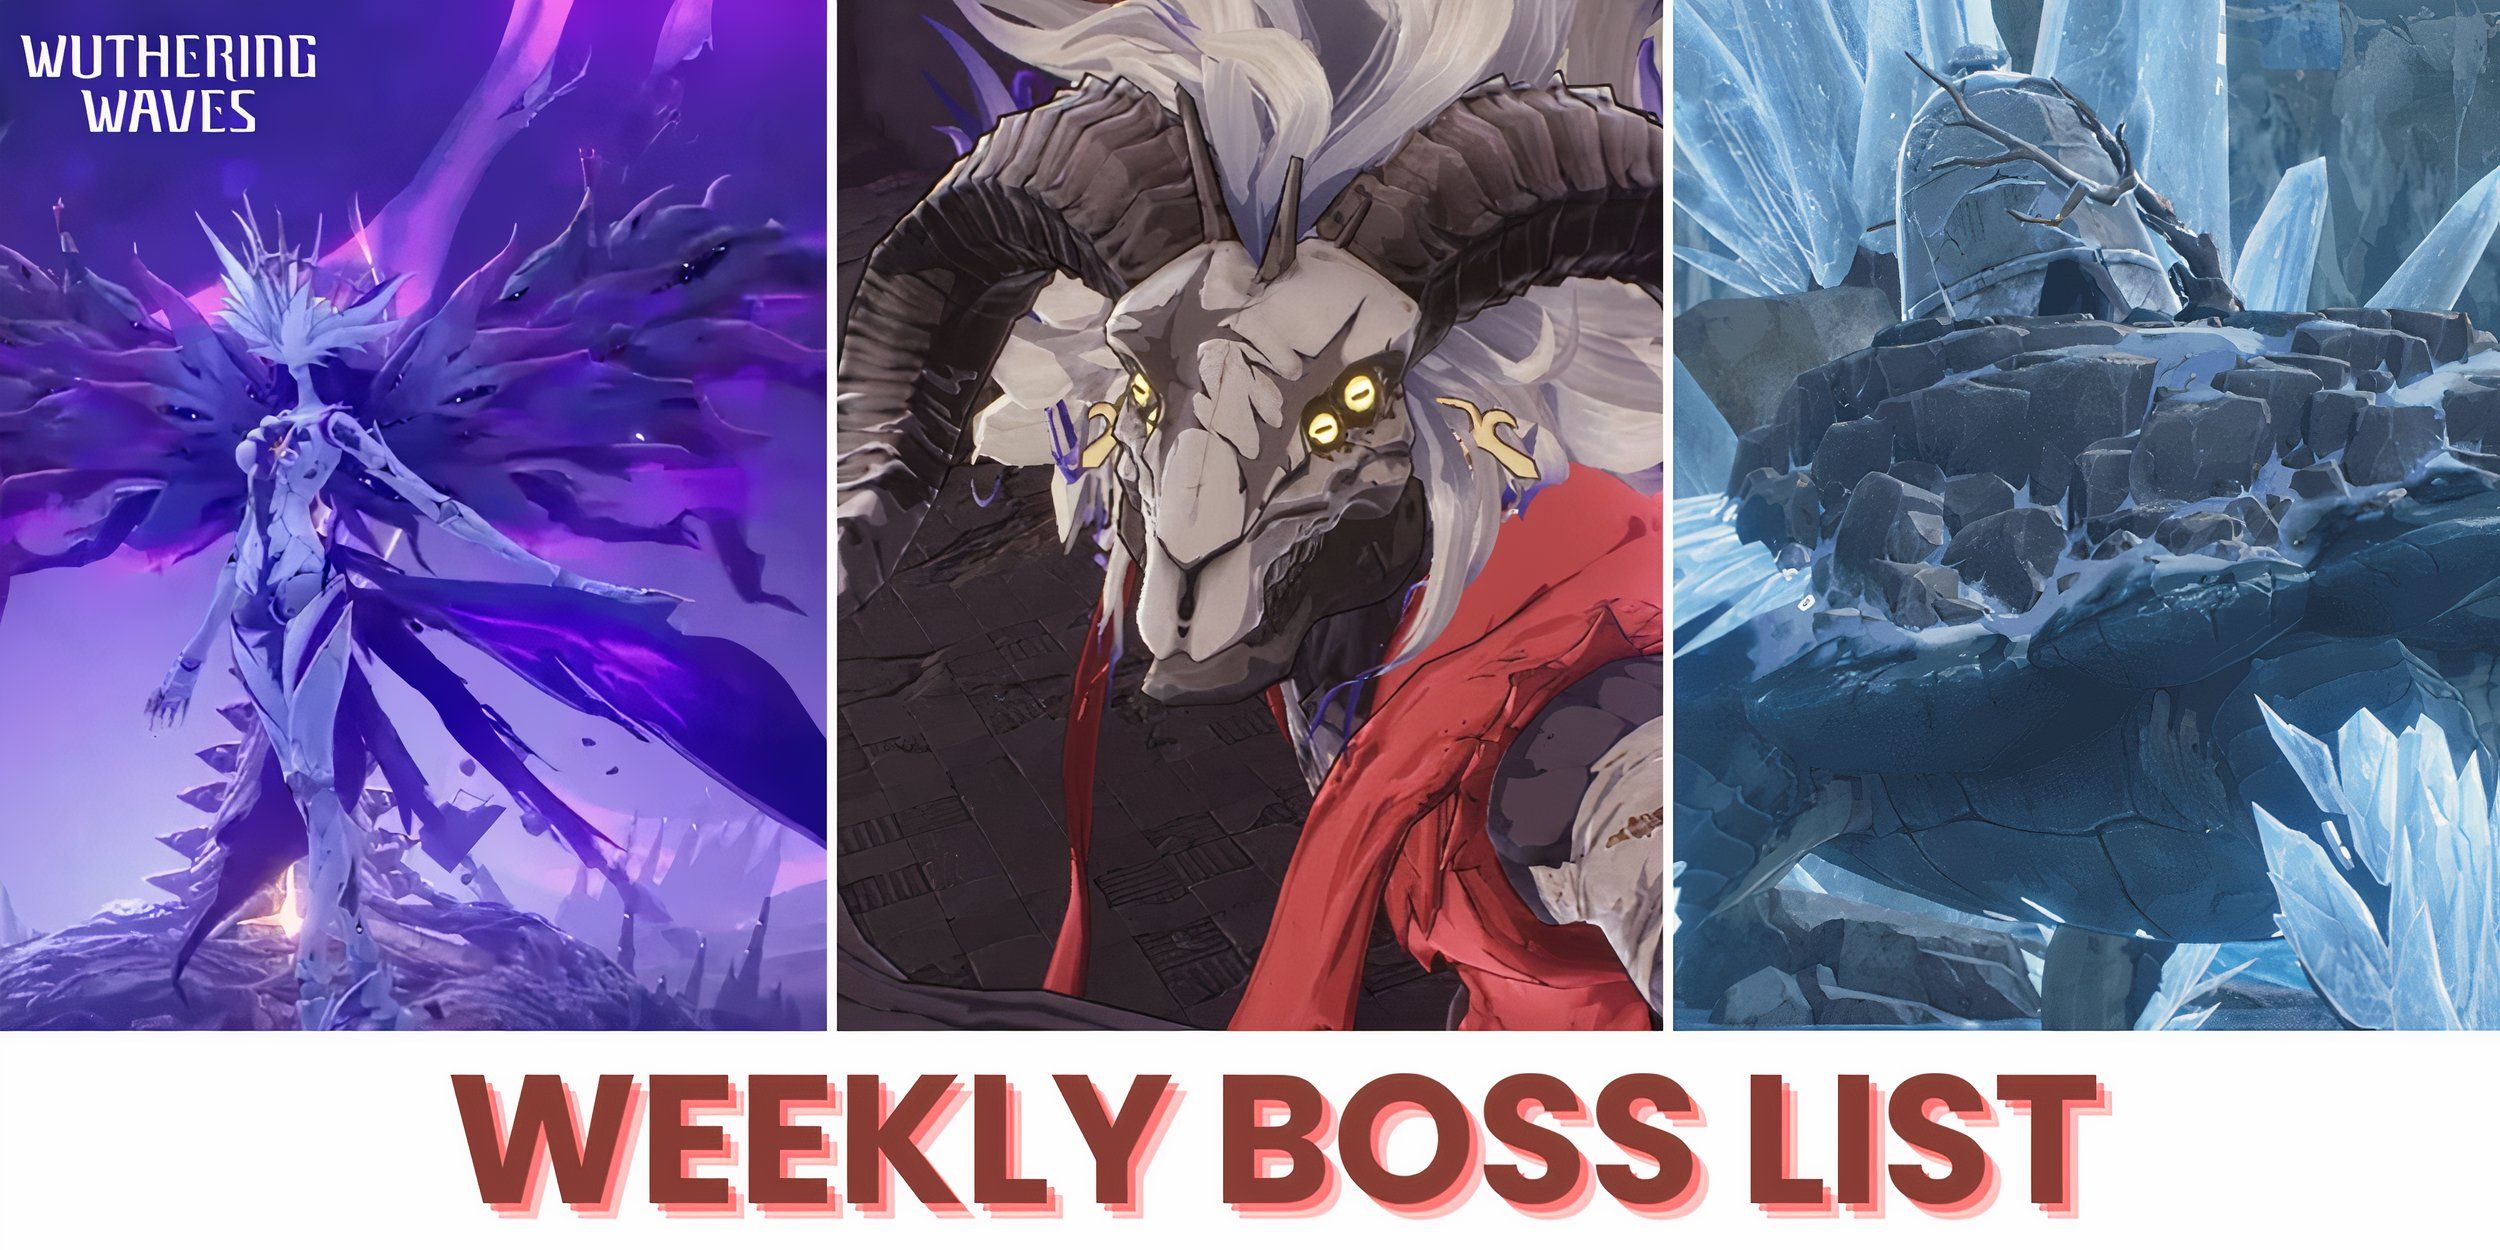 Wuthering Waves_ Weekly Boss List (& How To Unlock Them)